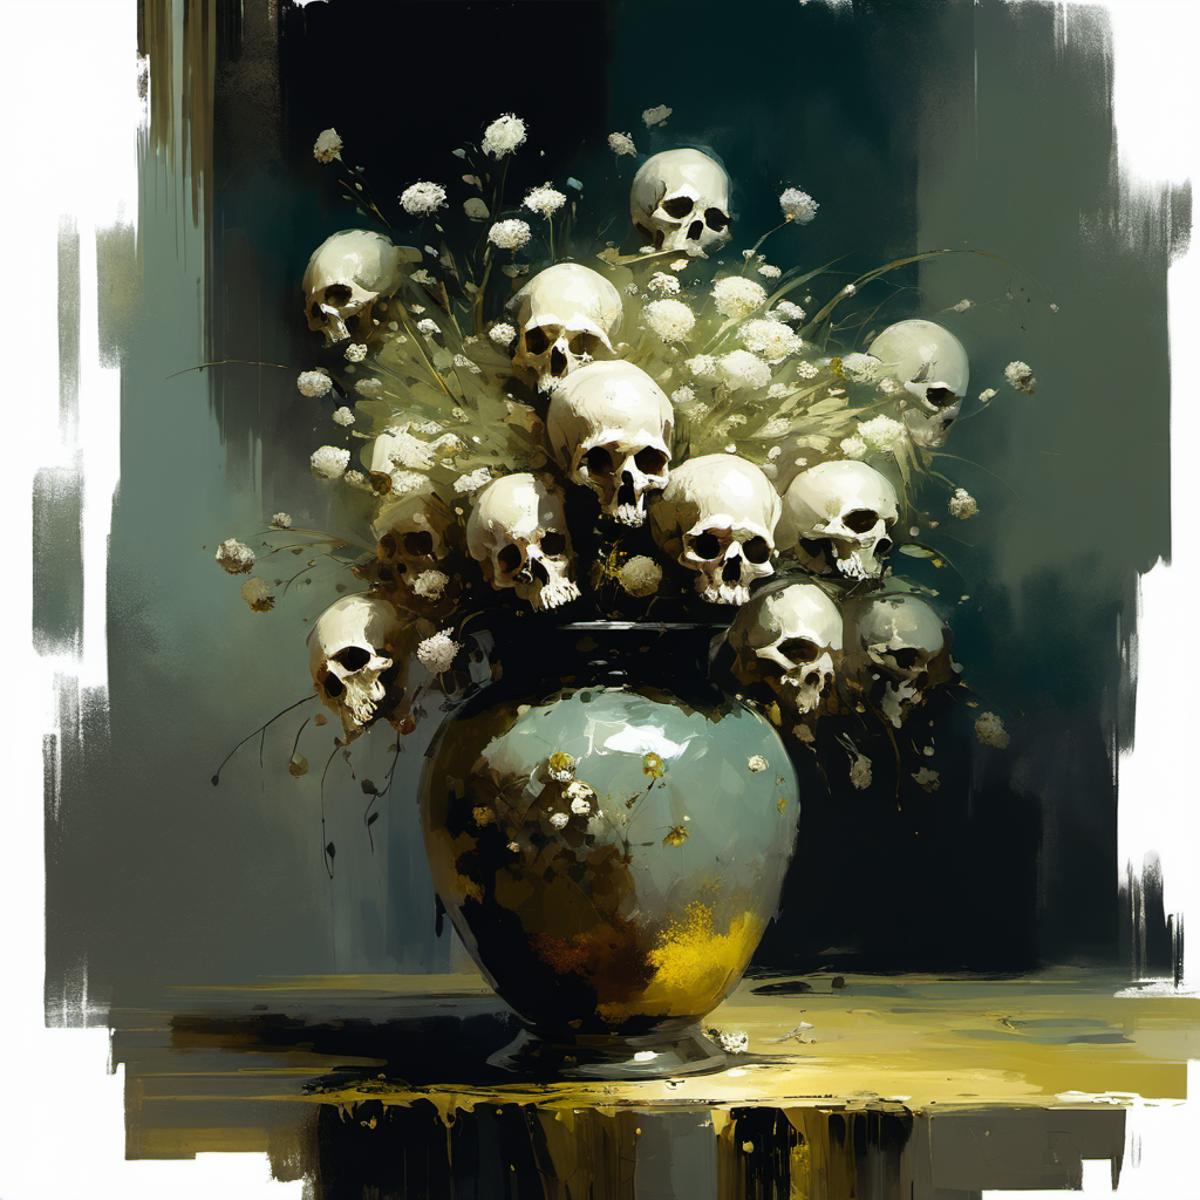 A Painting of a Black Vase Filled with White Flowers and Skulls as Decorations